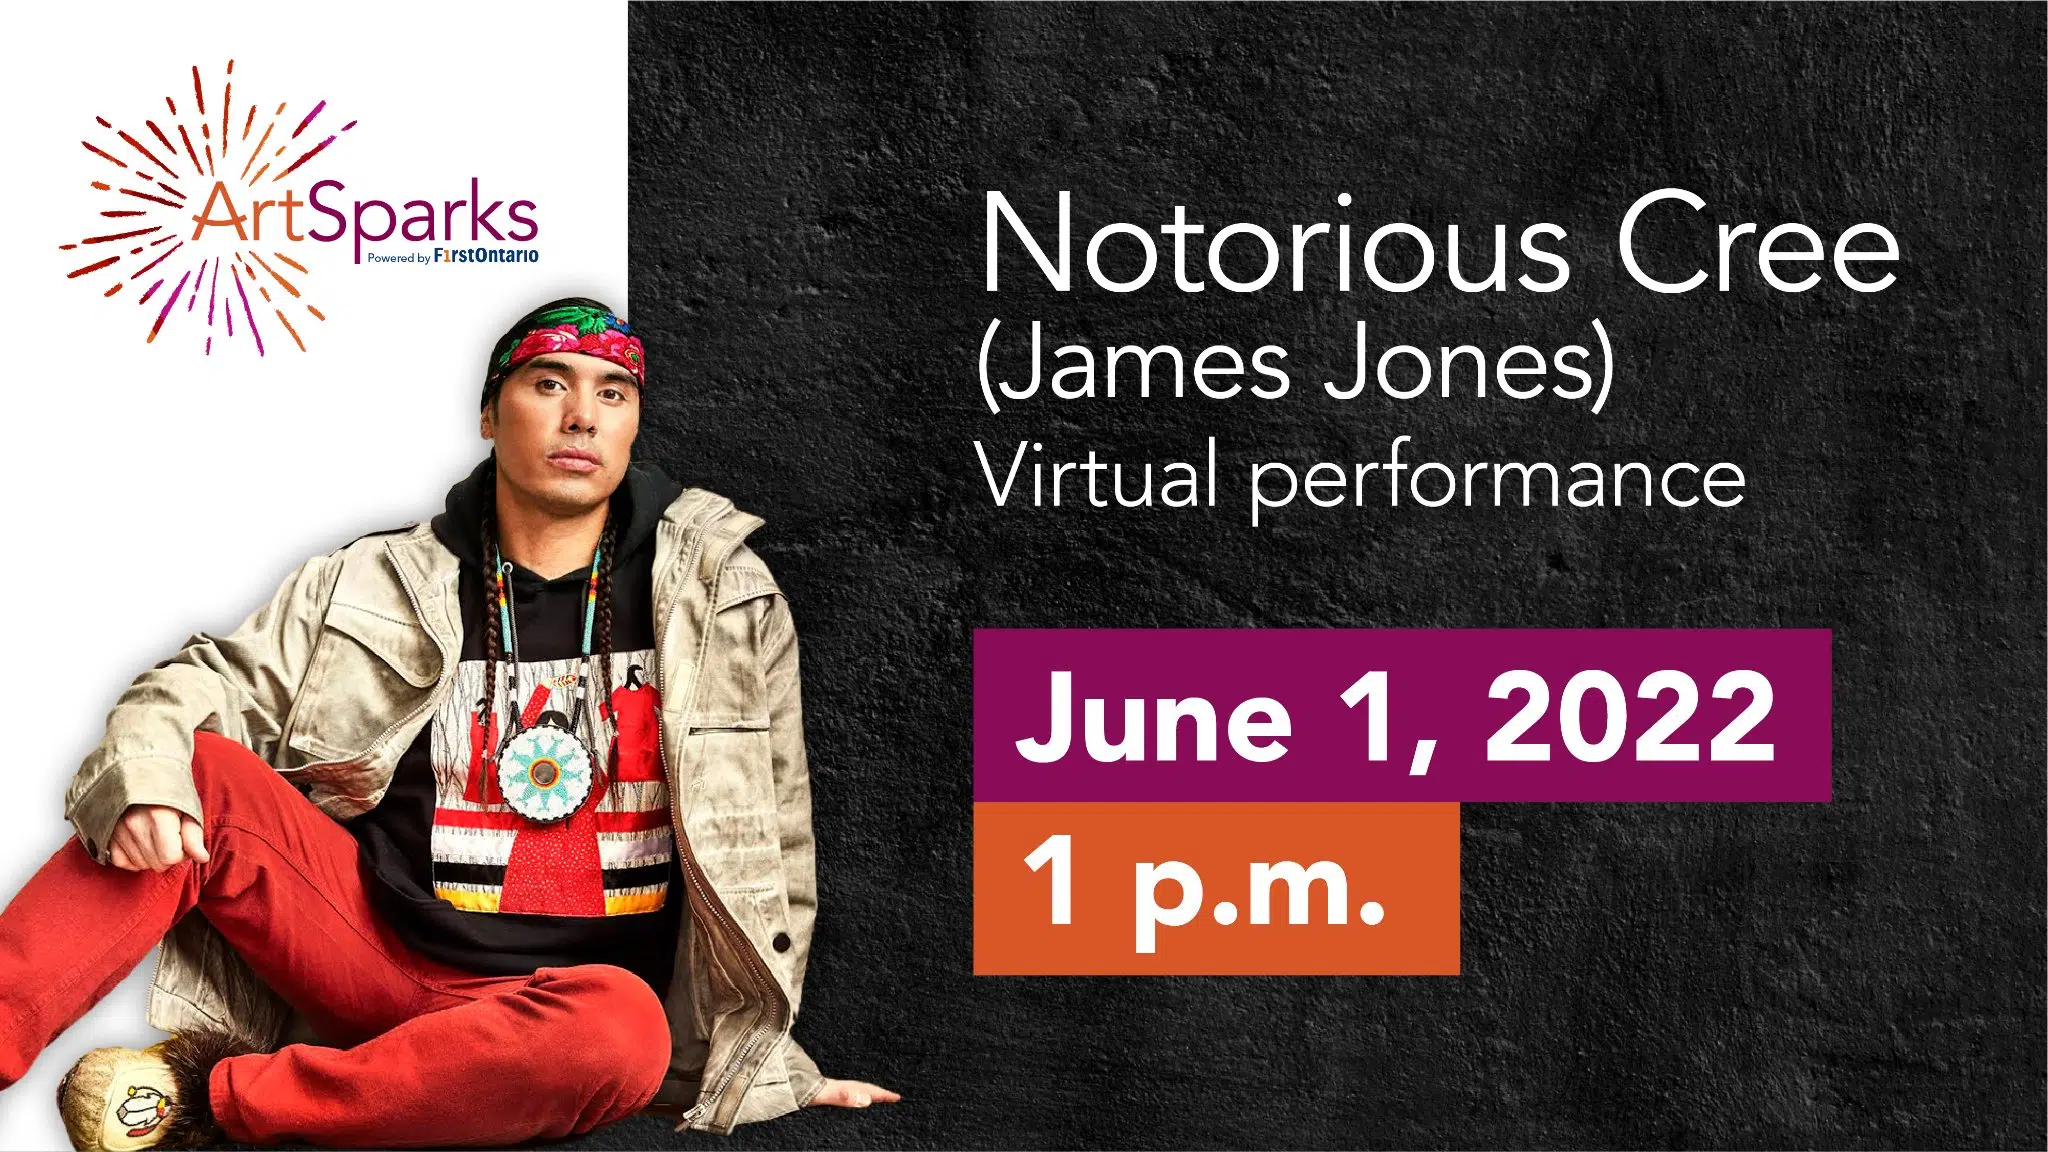 FirstOntario Centre Milton invites you to a performance by Notorious Cree